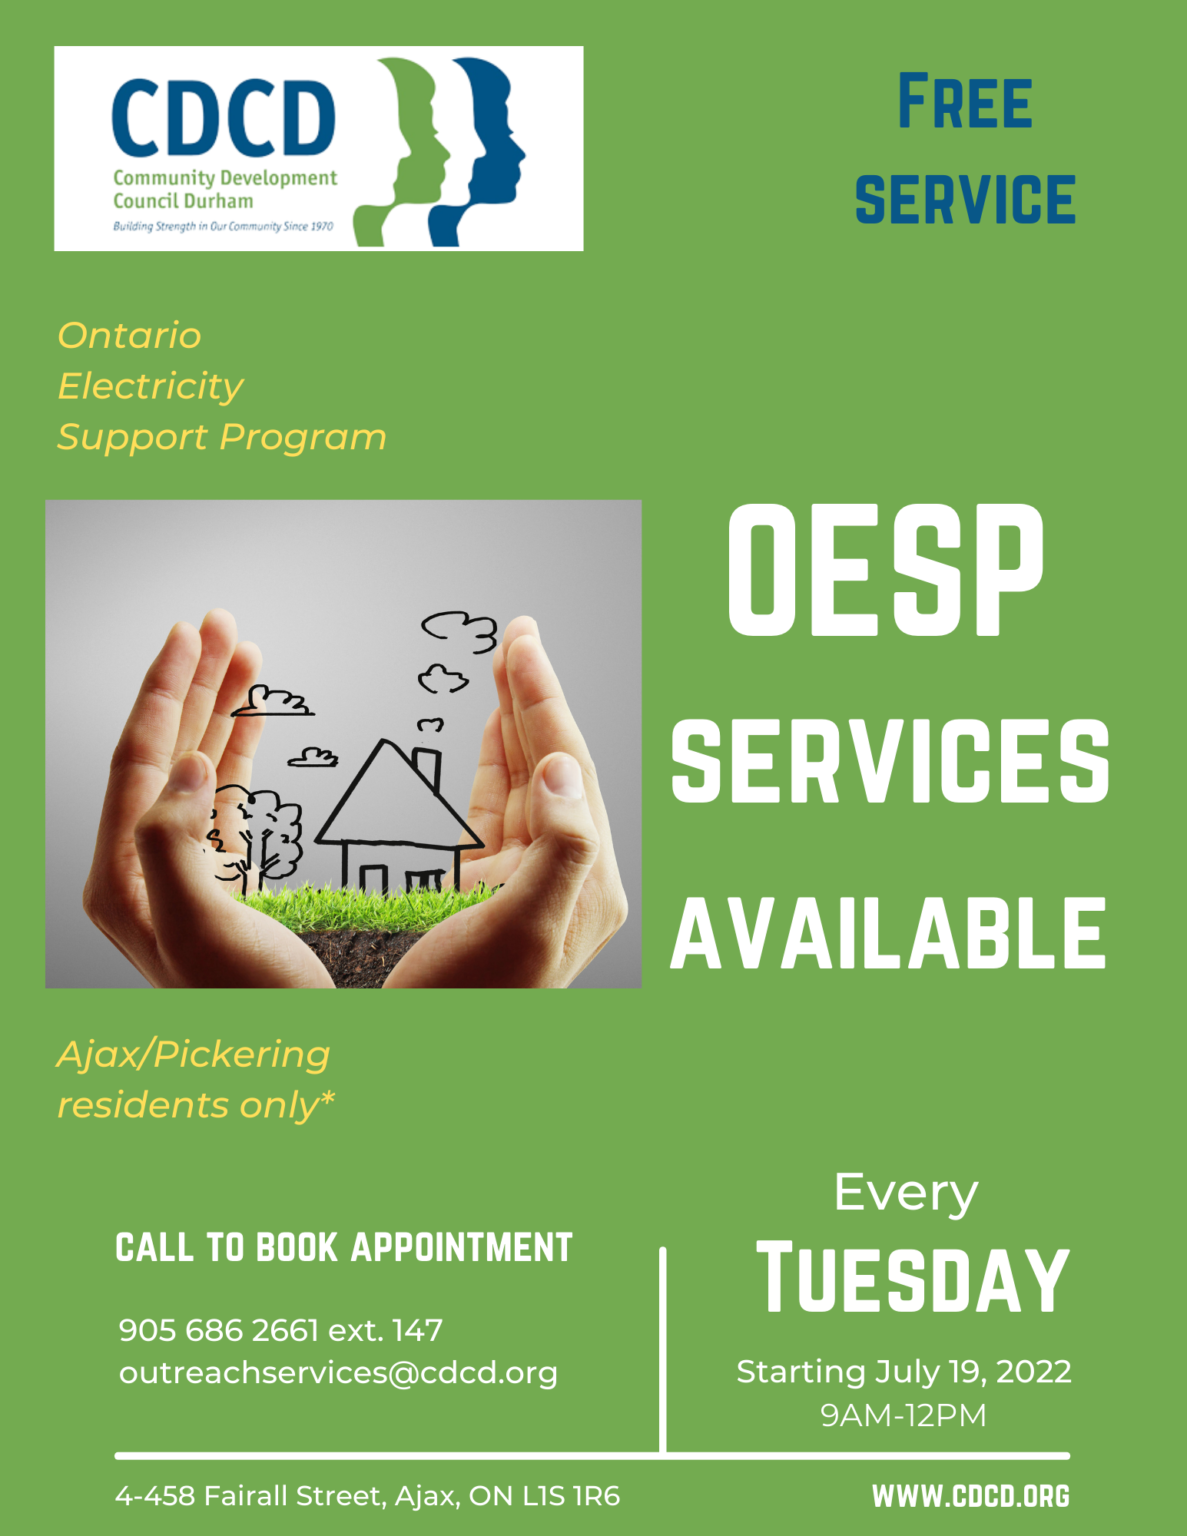 ontario-electricity-support-program-oesp-services-cdcd